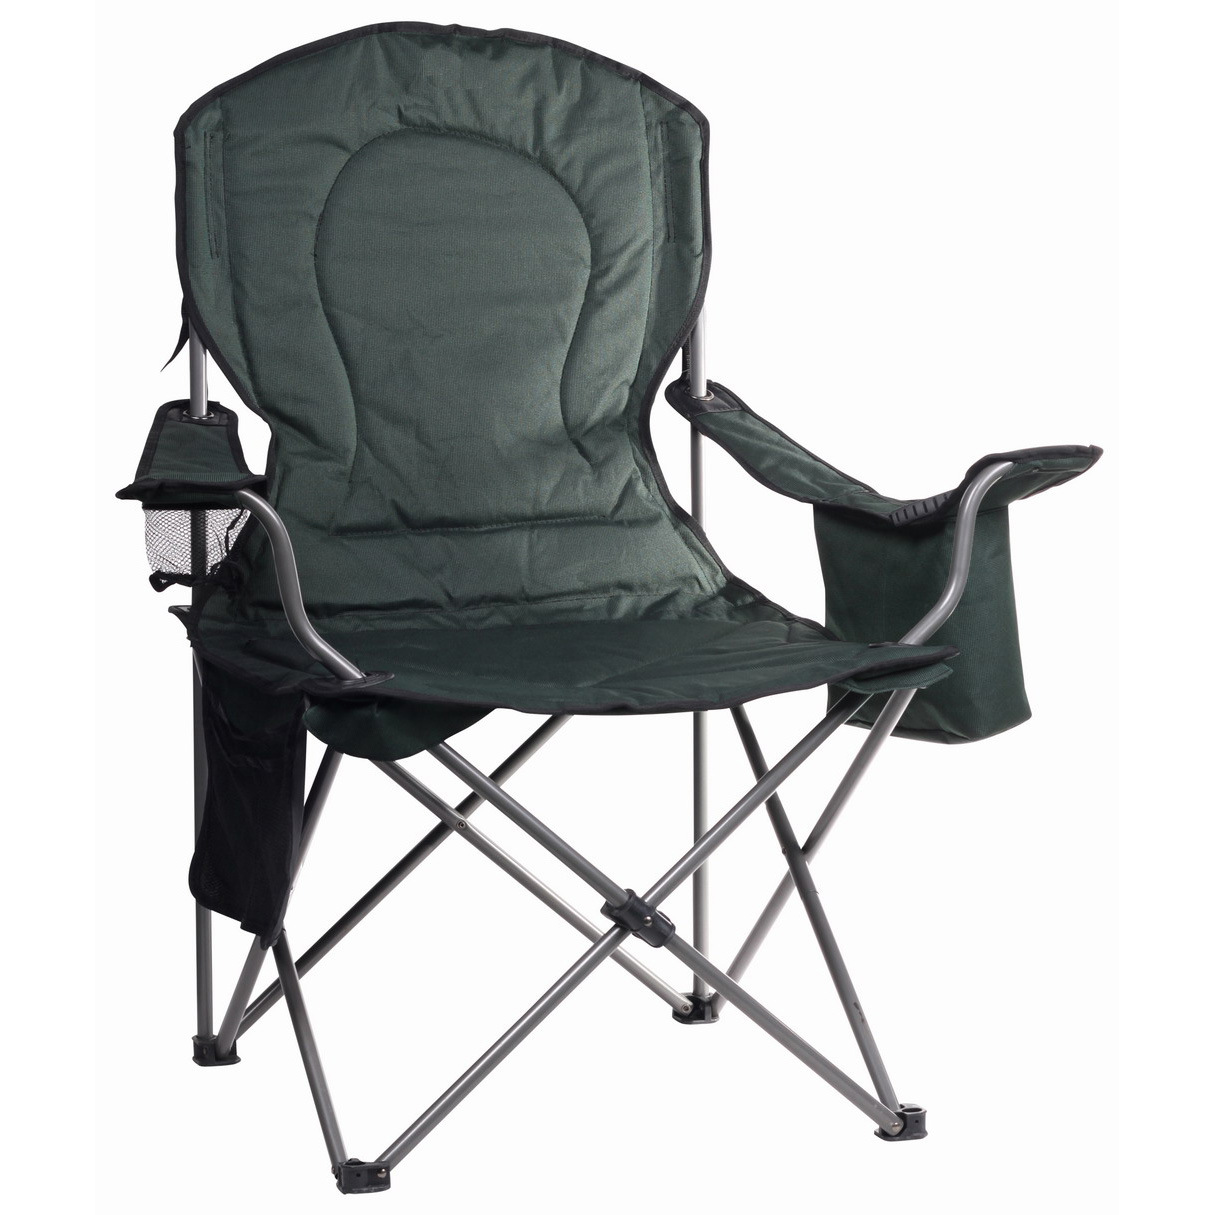 OEM Design Padded Cooler Camping Chair